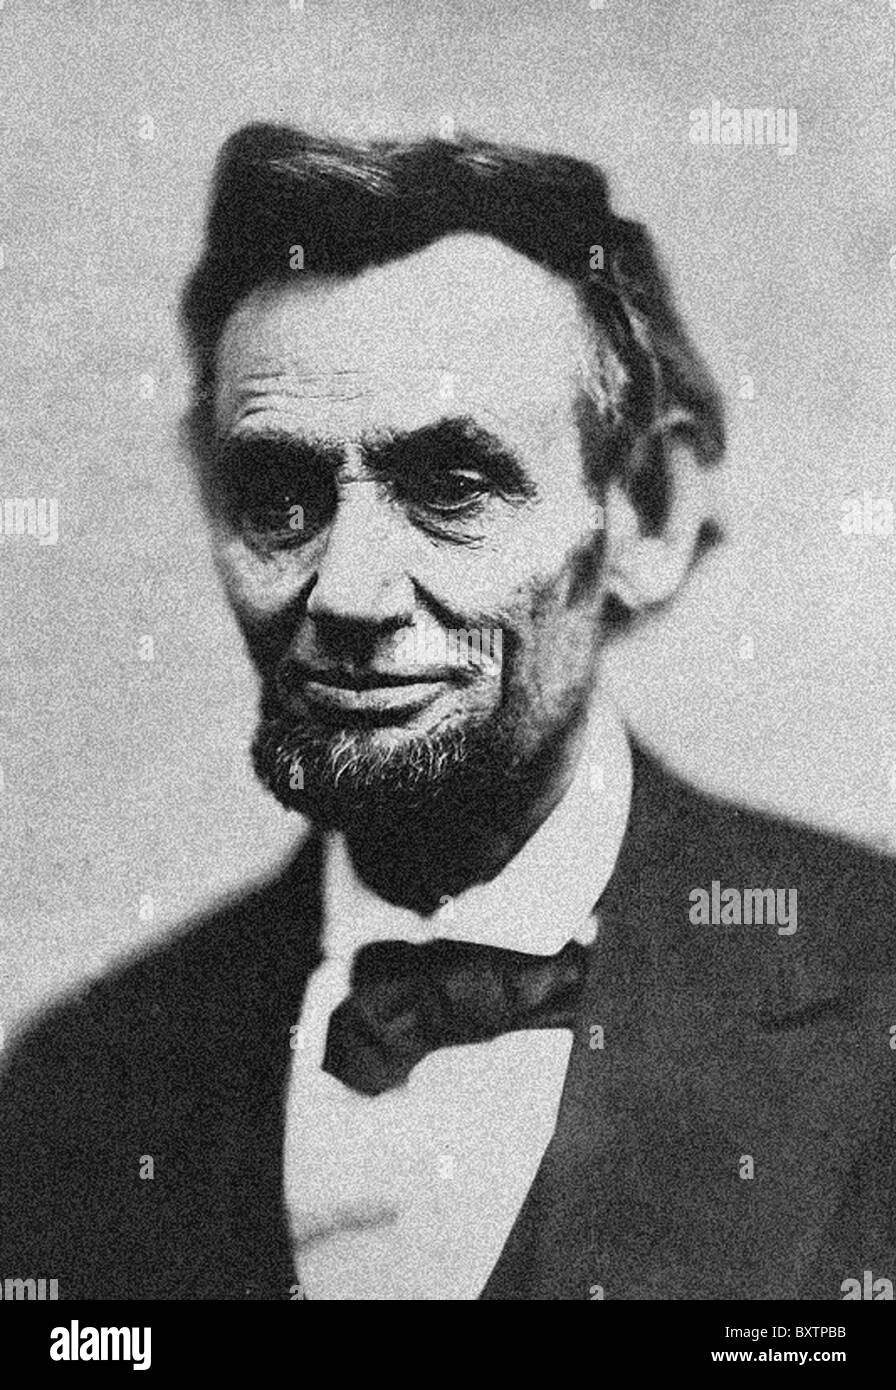 Abraham Lincoln (February 12, 1809 – April 15, 1865) served as the 16th President of the United States. Stock Photo